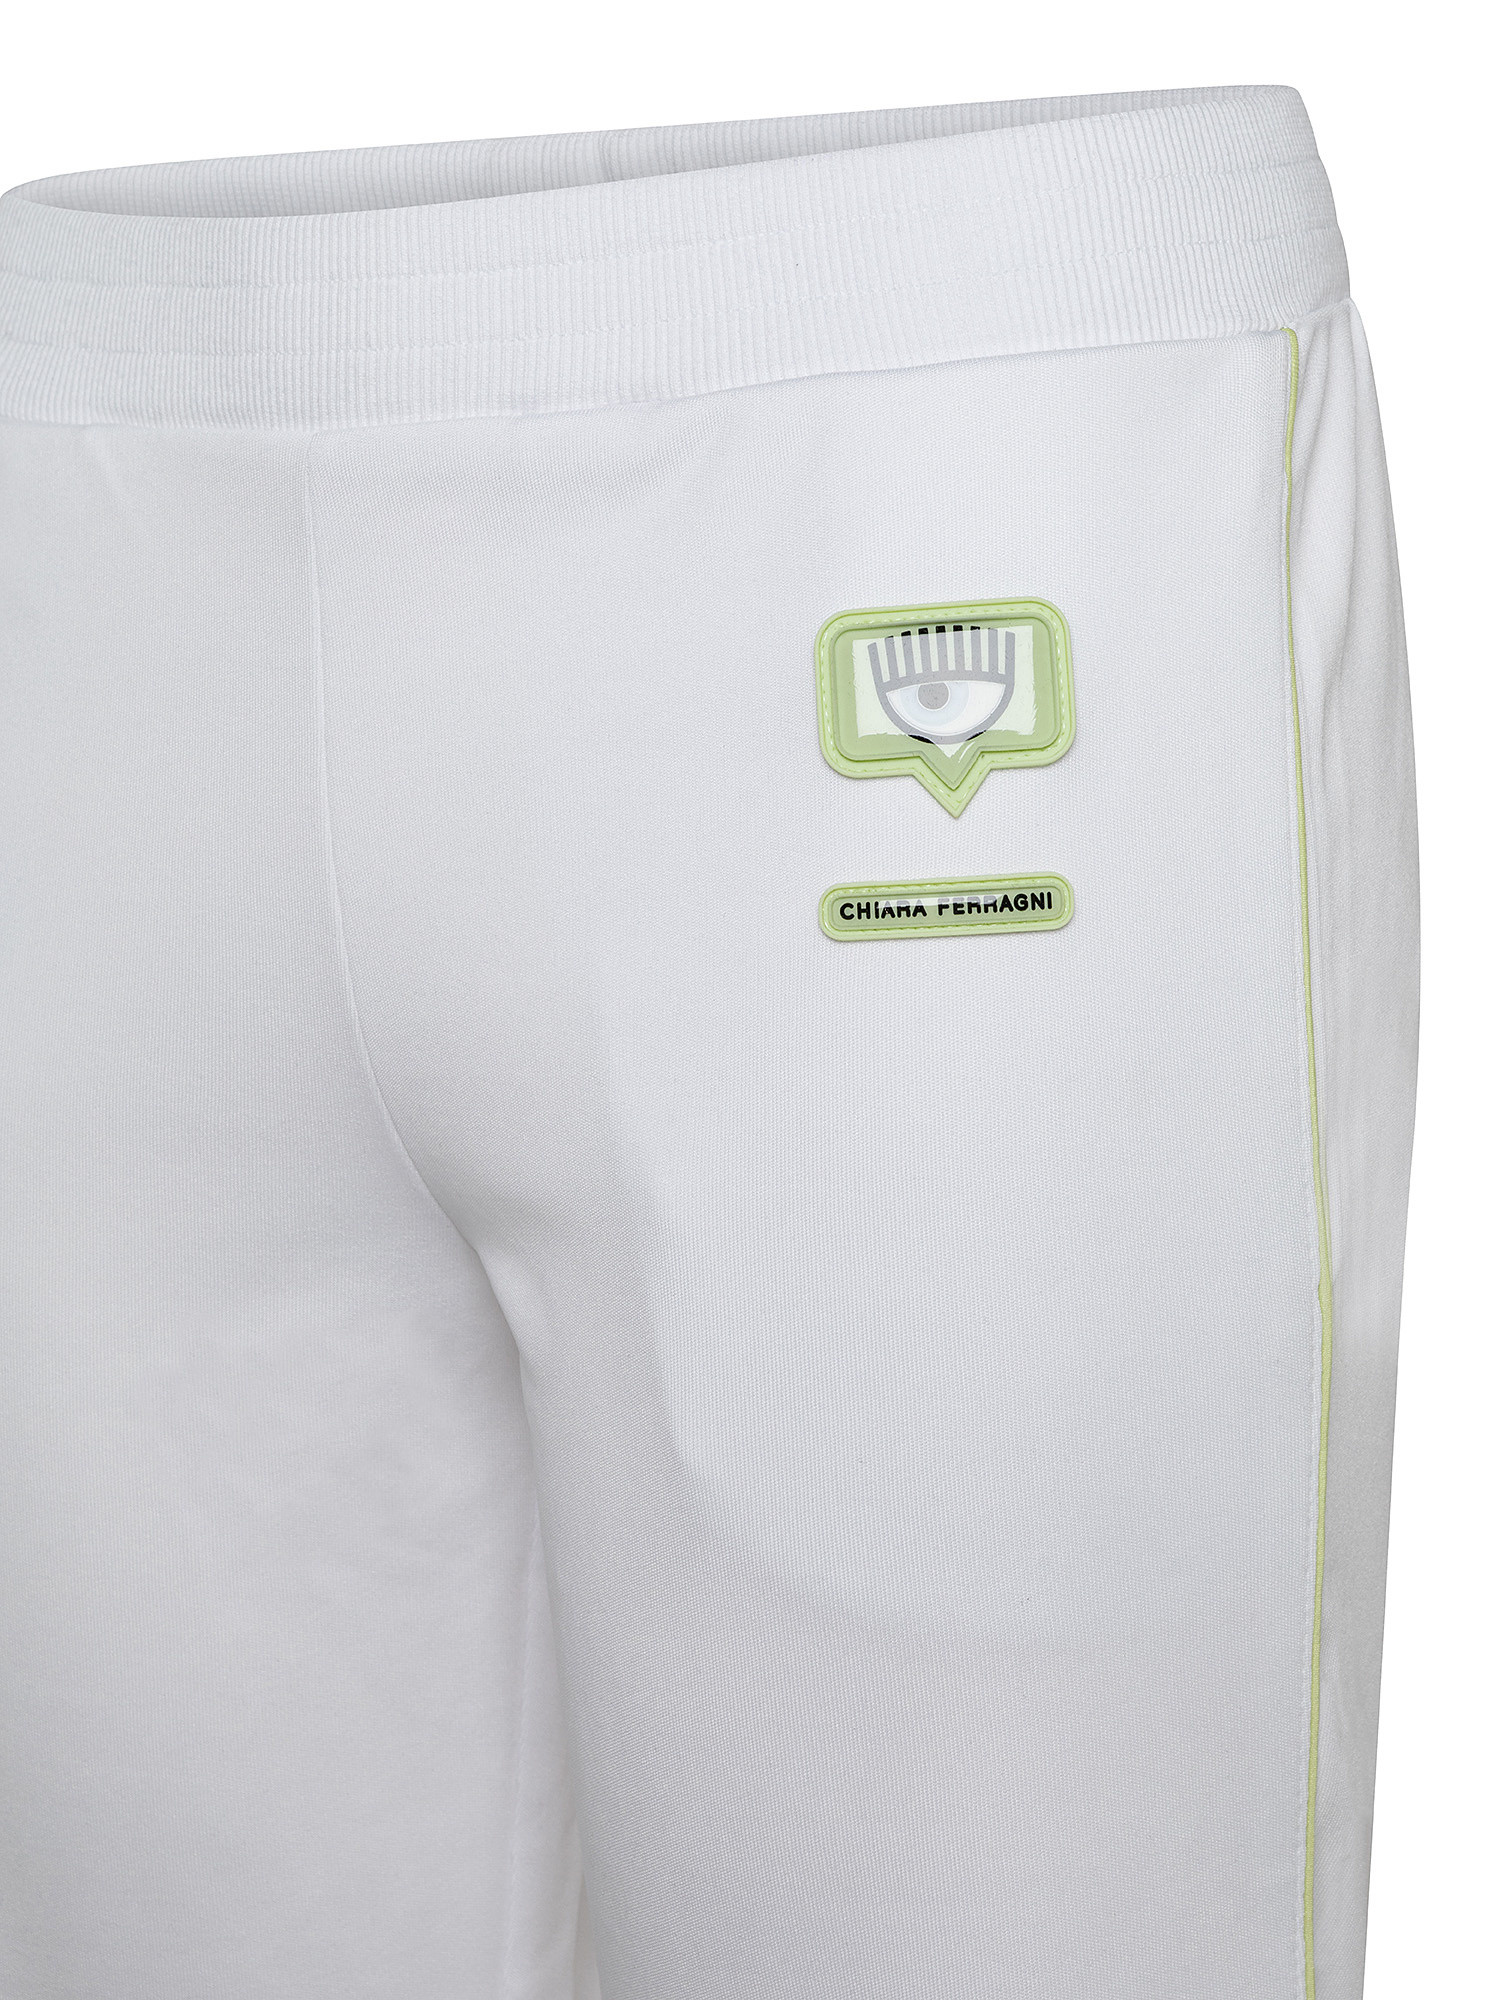 Trousers, White, large image number 2